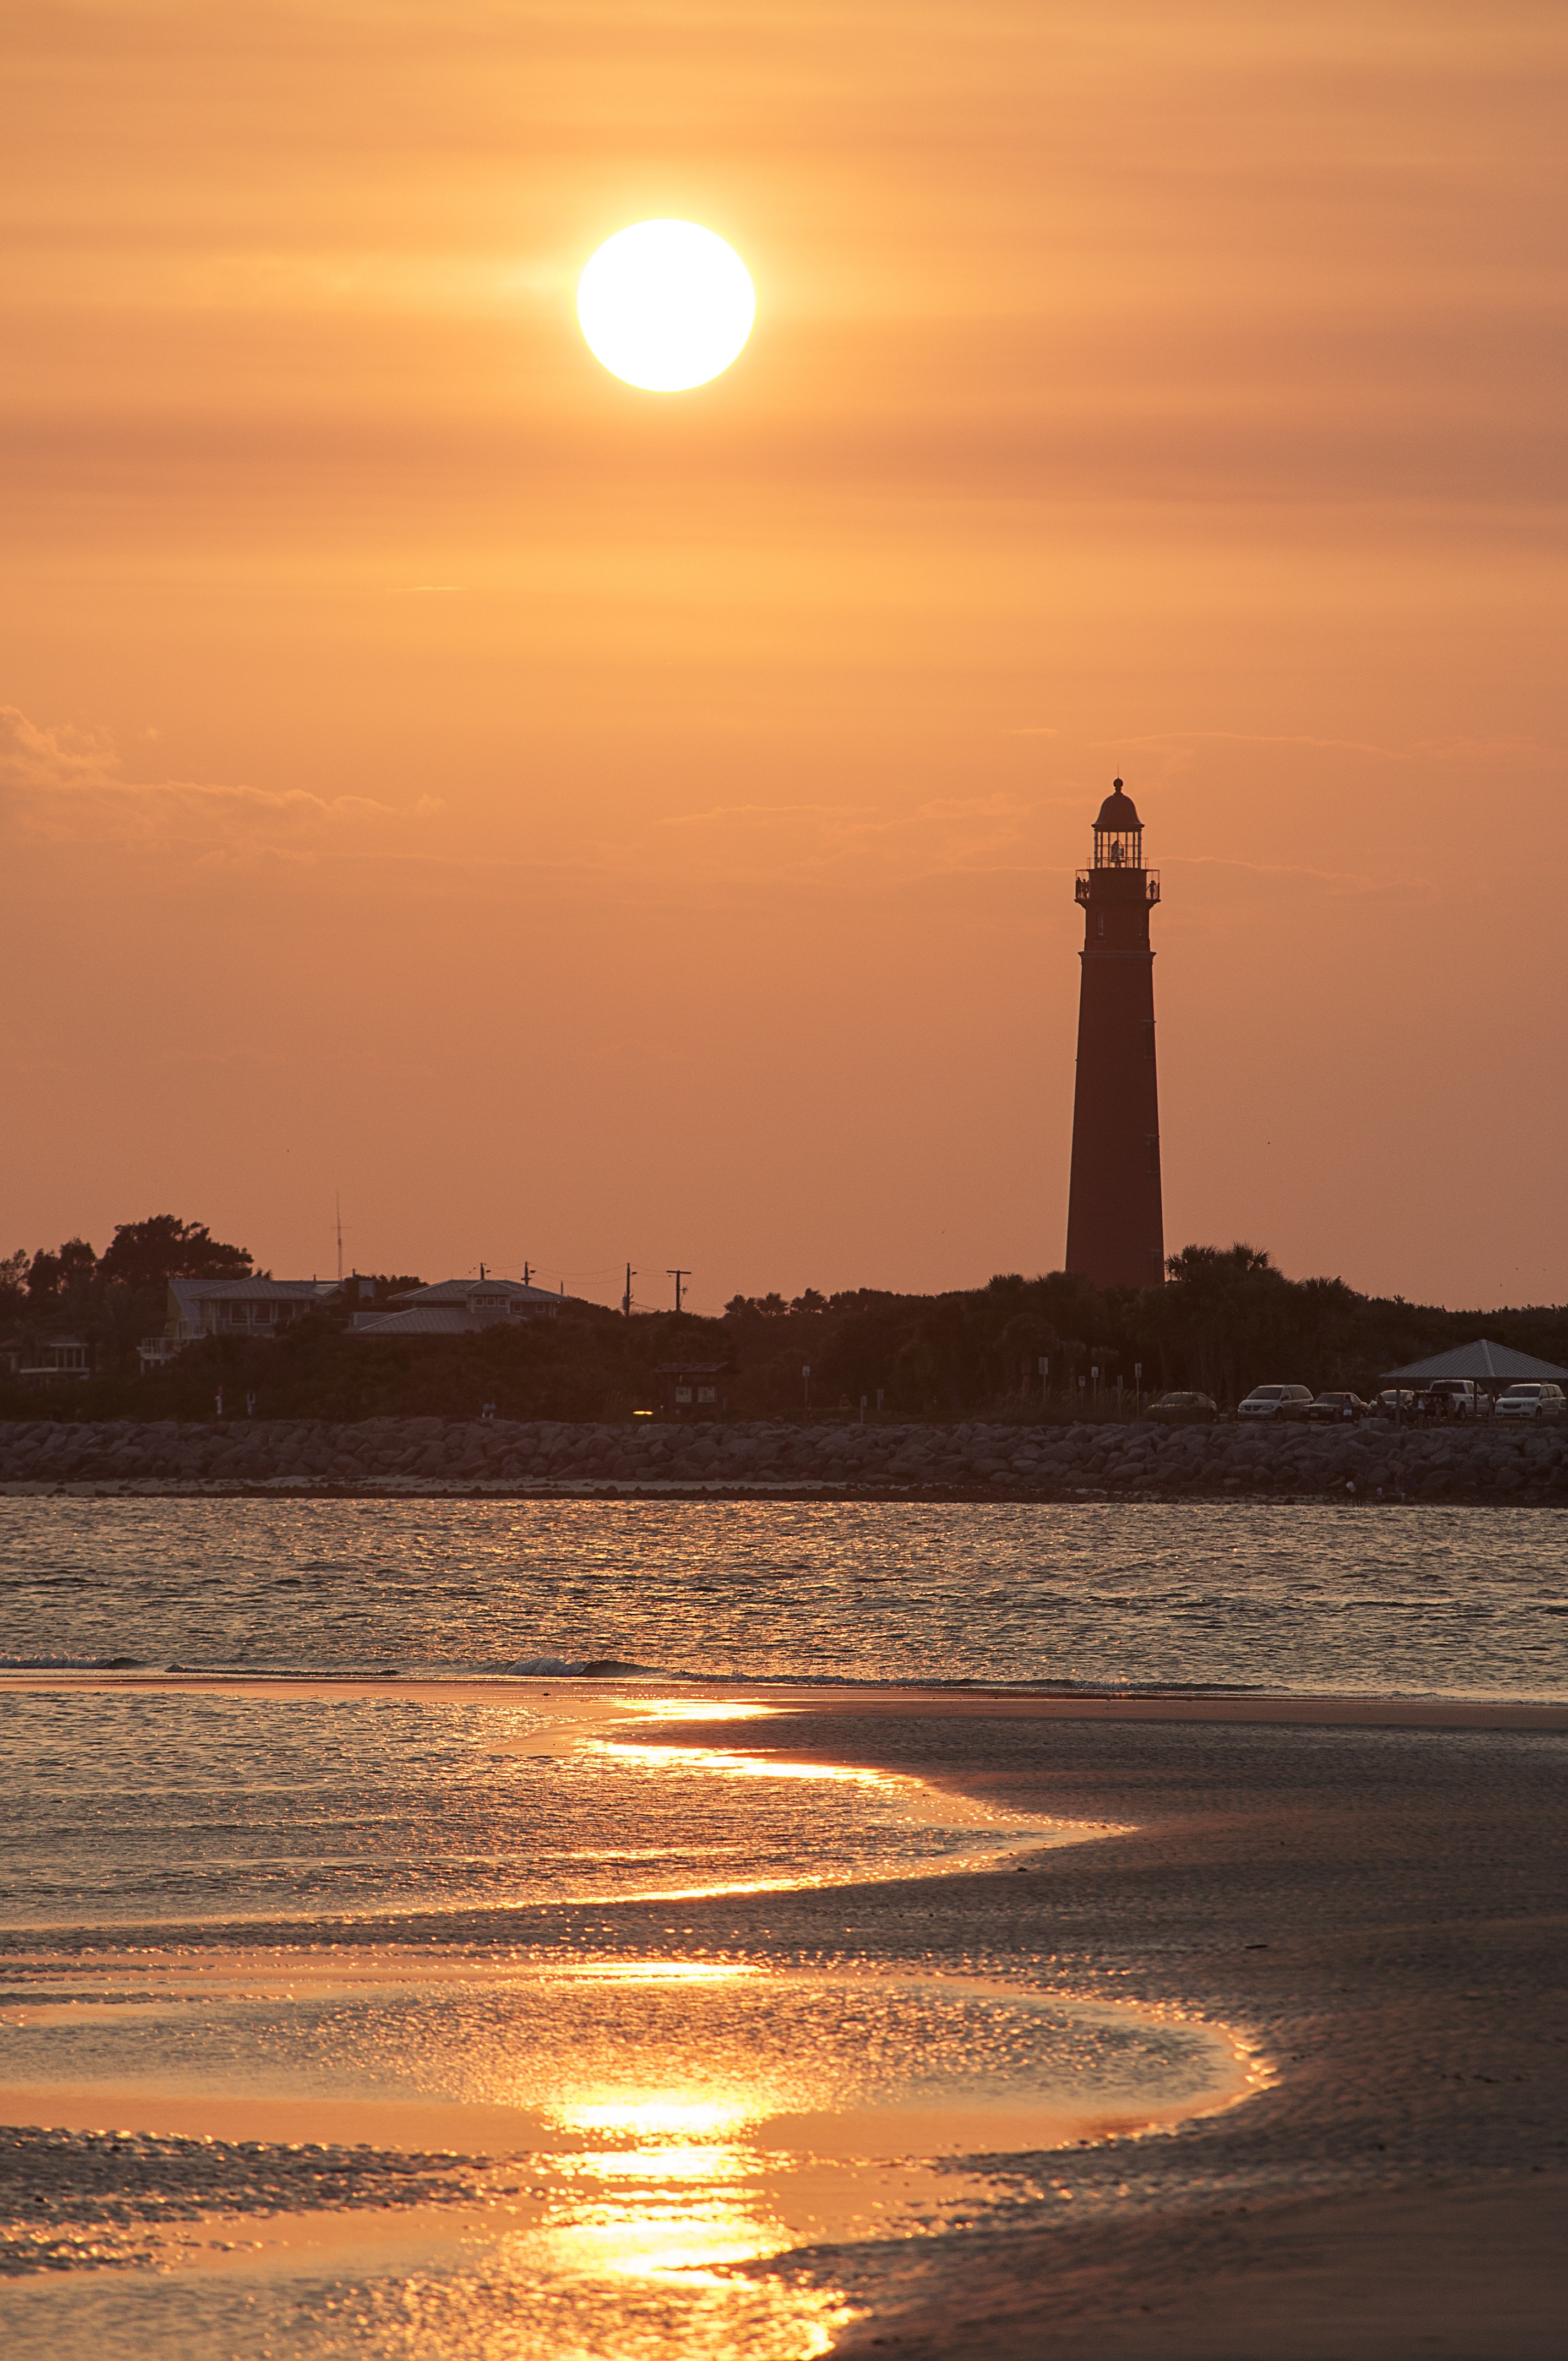 Ocean, Sky, Ponce Inlet, Lighthouse, lighthouse, sunset